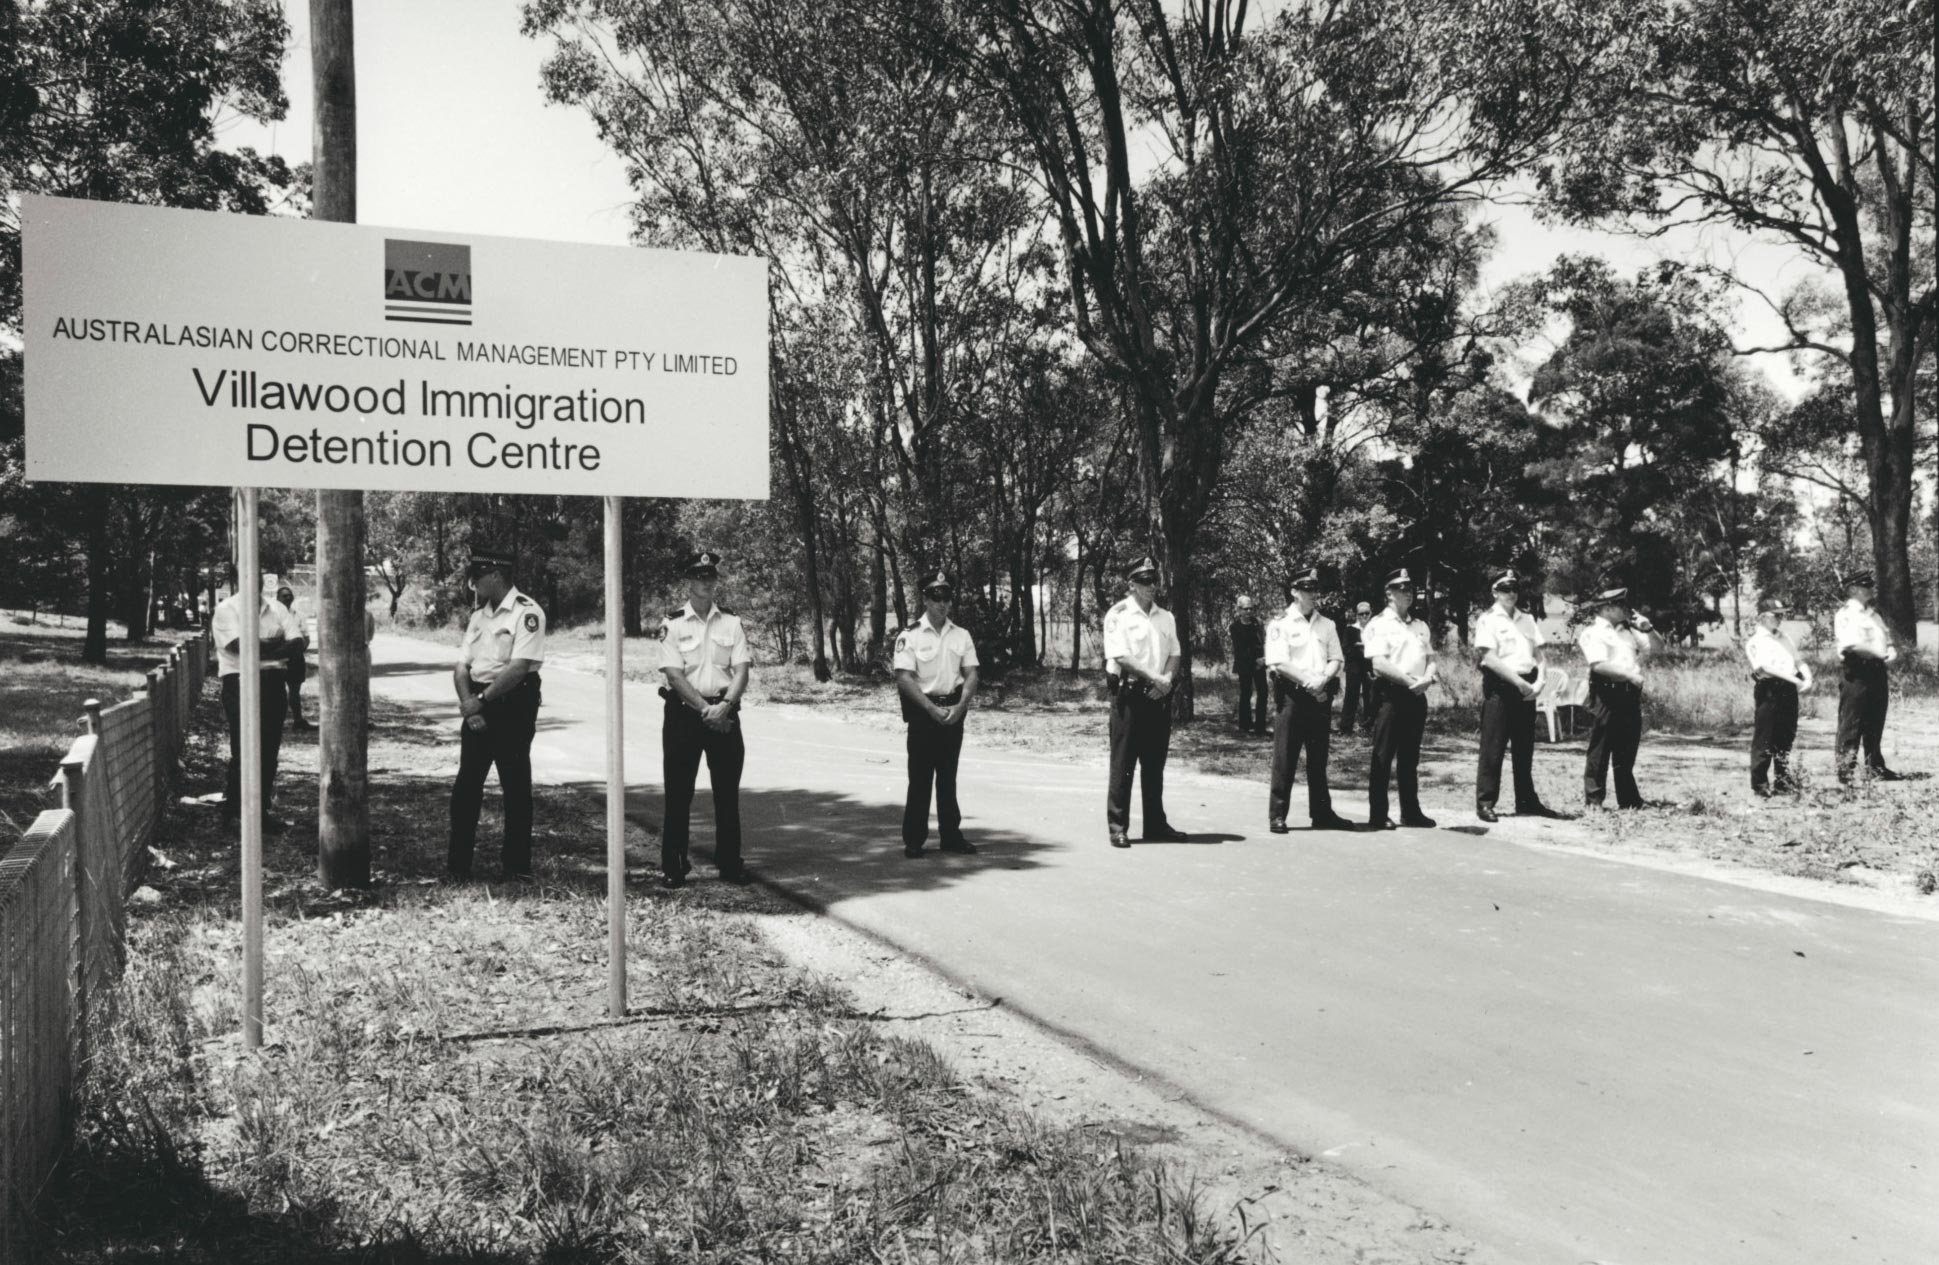 Police security line at Villawood Immigration Detention Centre, Sydney, January 2002.